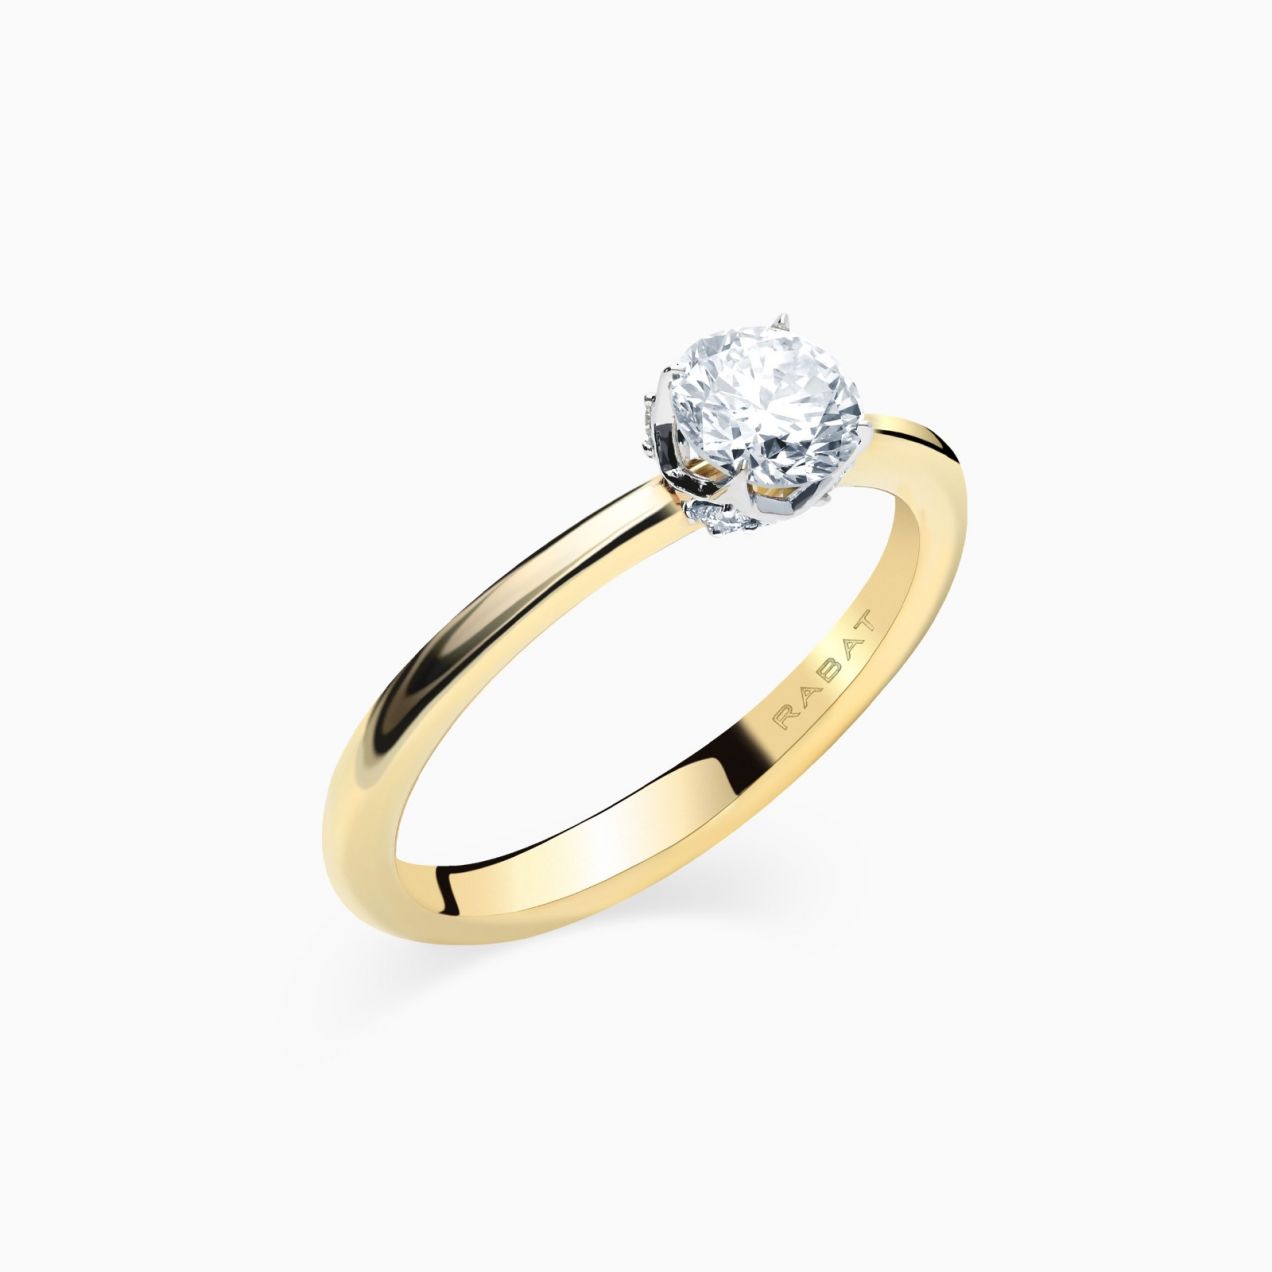 Solitaire ring in yellow gold with central diamond and mini diamonds